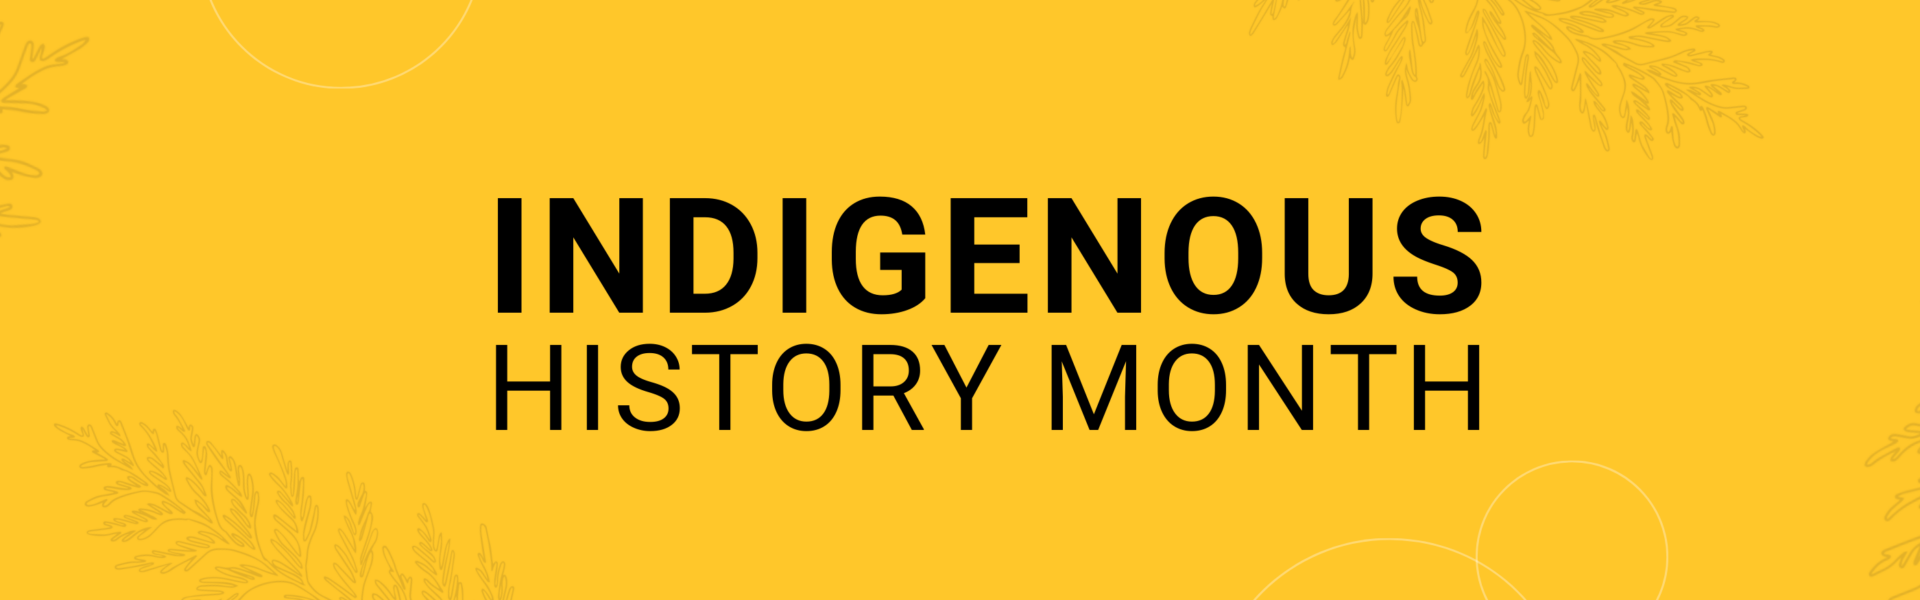 Indigenous History Month.